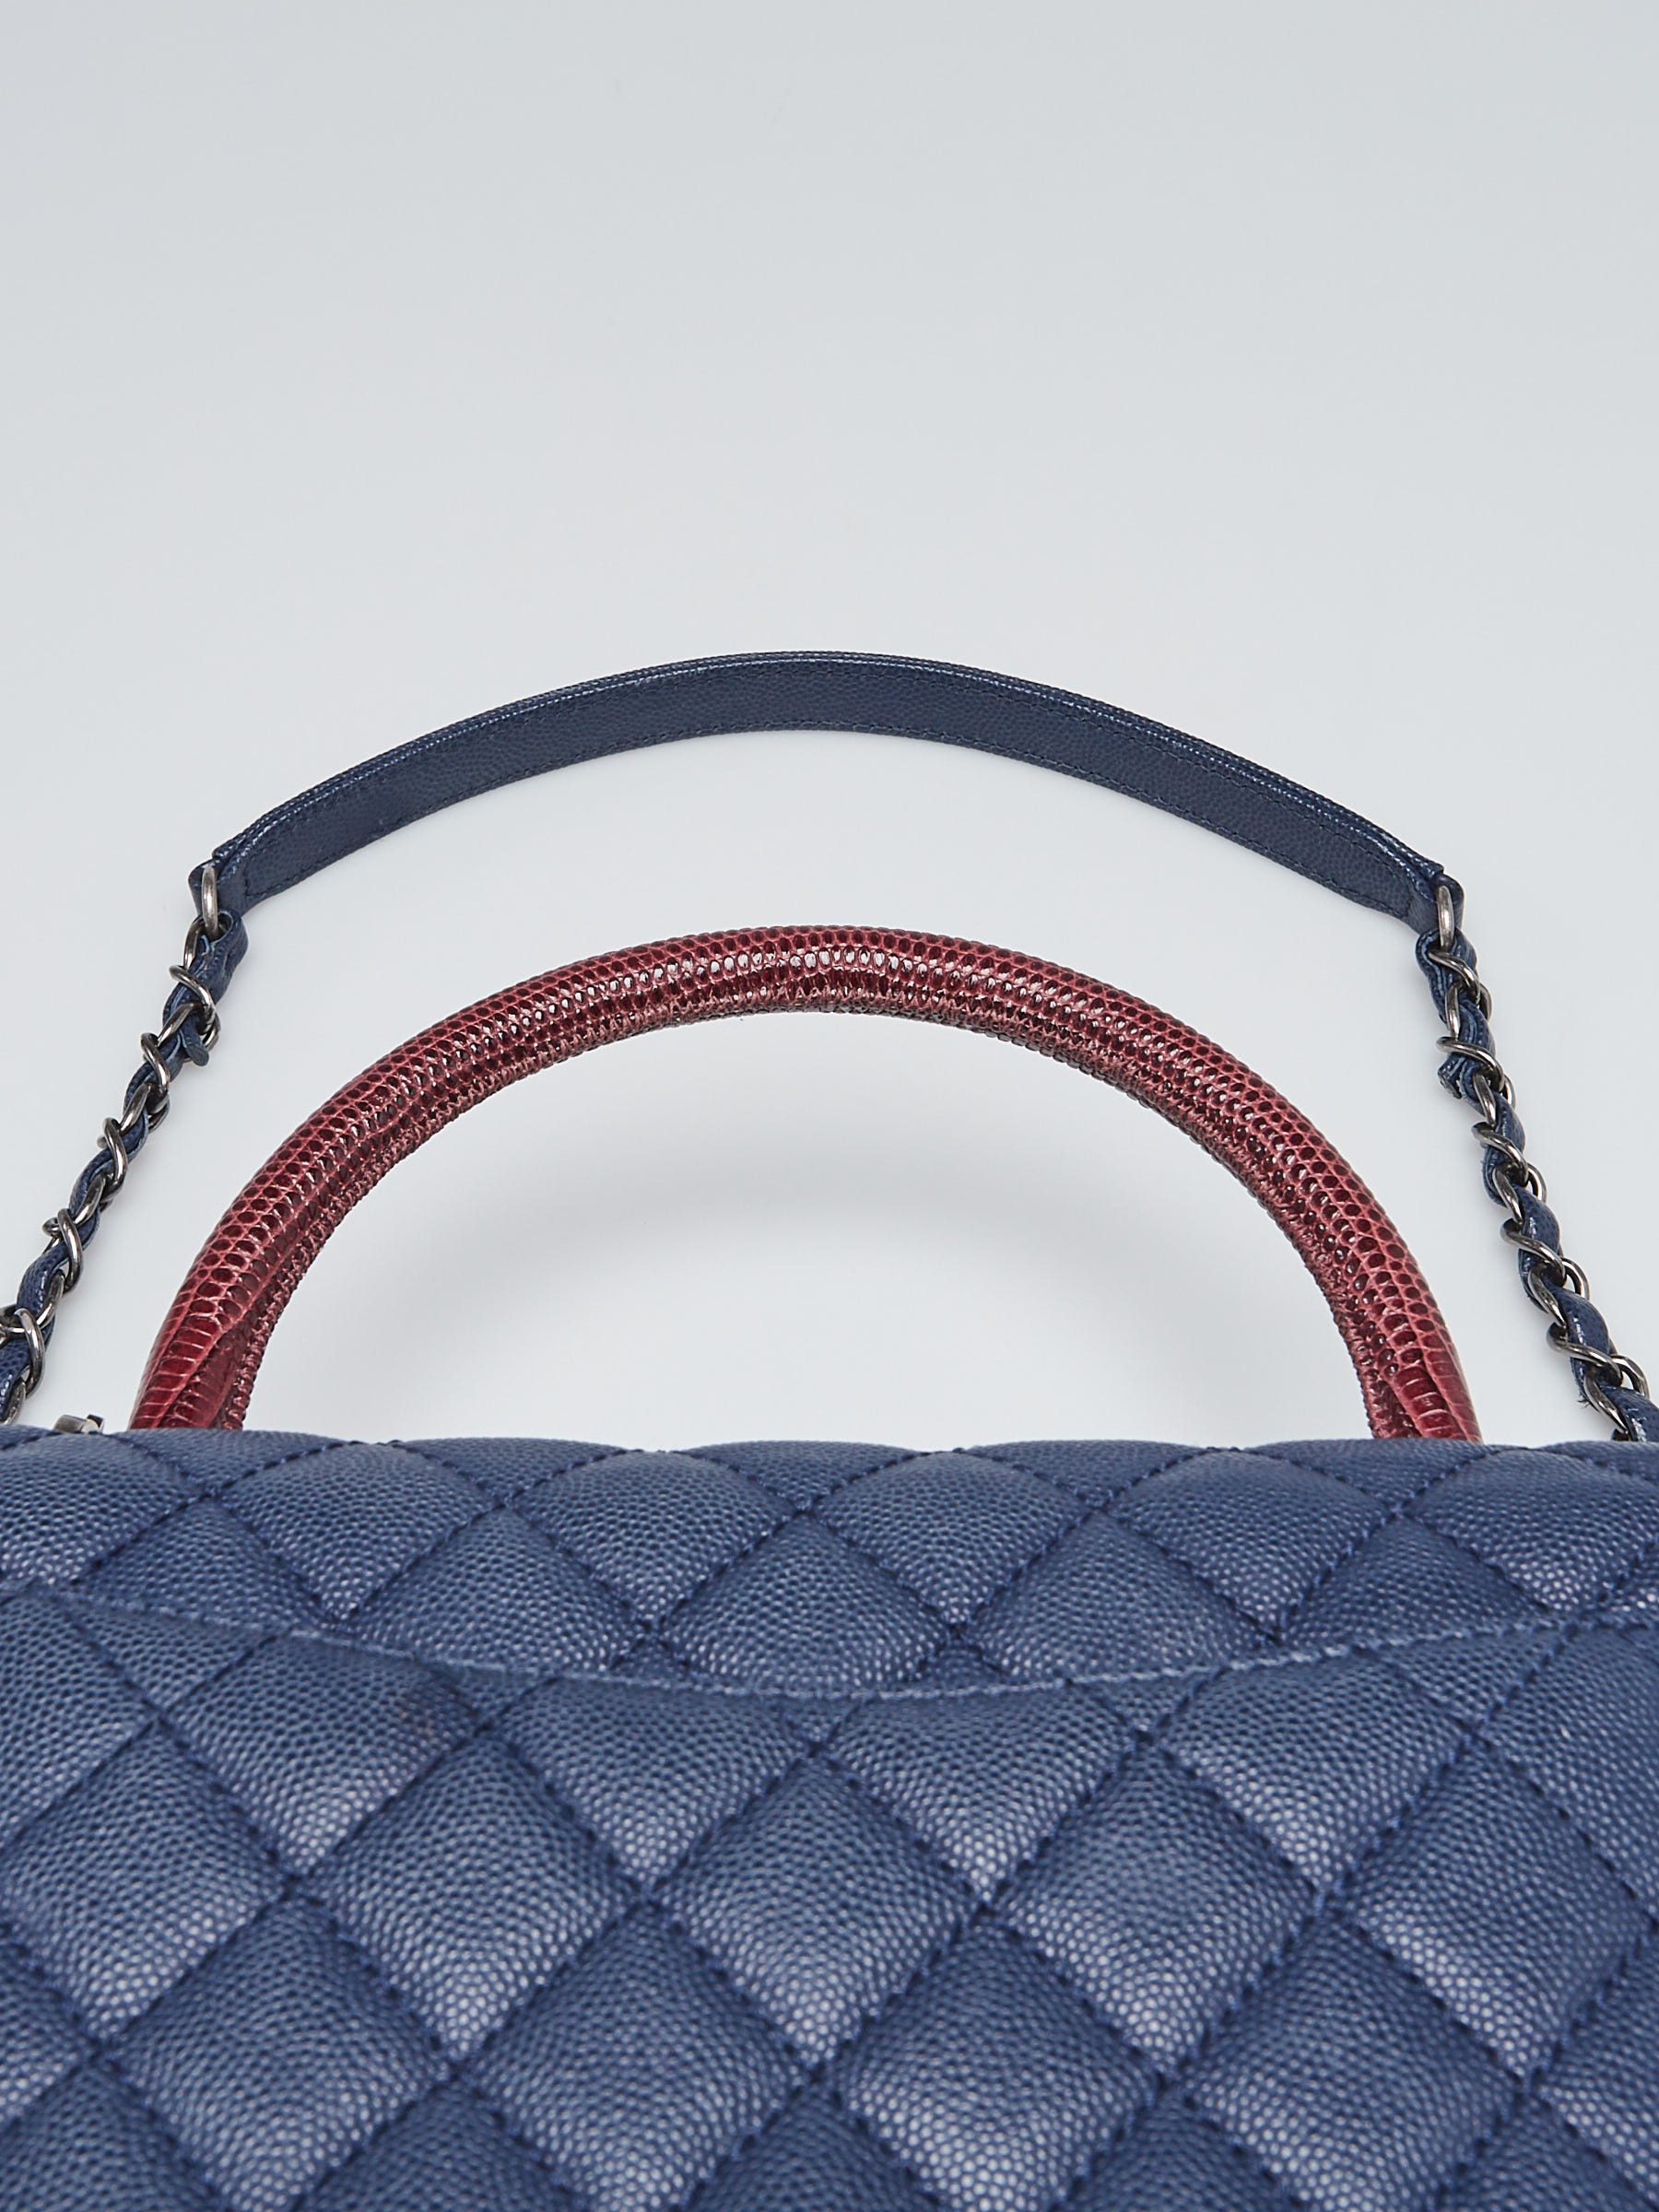 Chanel Navy Blue Quilted Caviar Leather Small Lizard Handle Coco